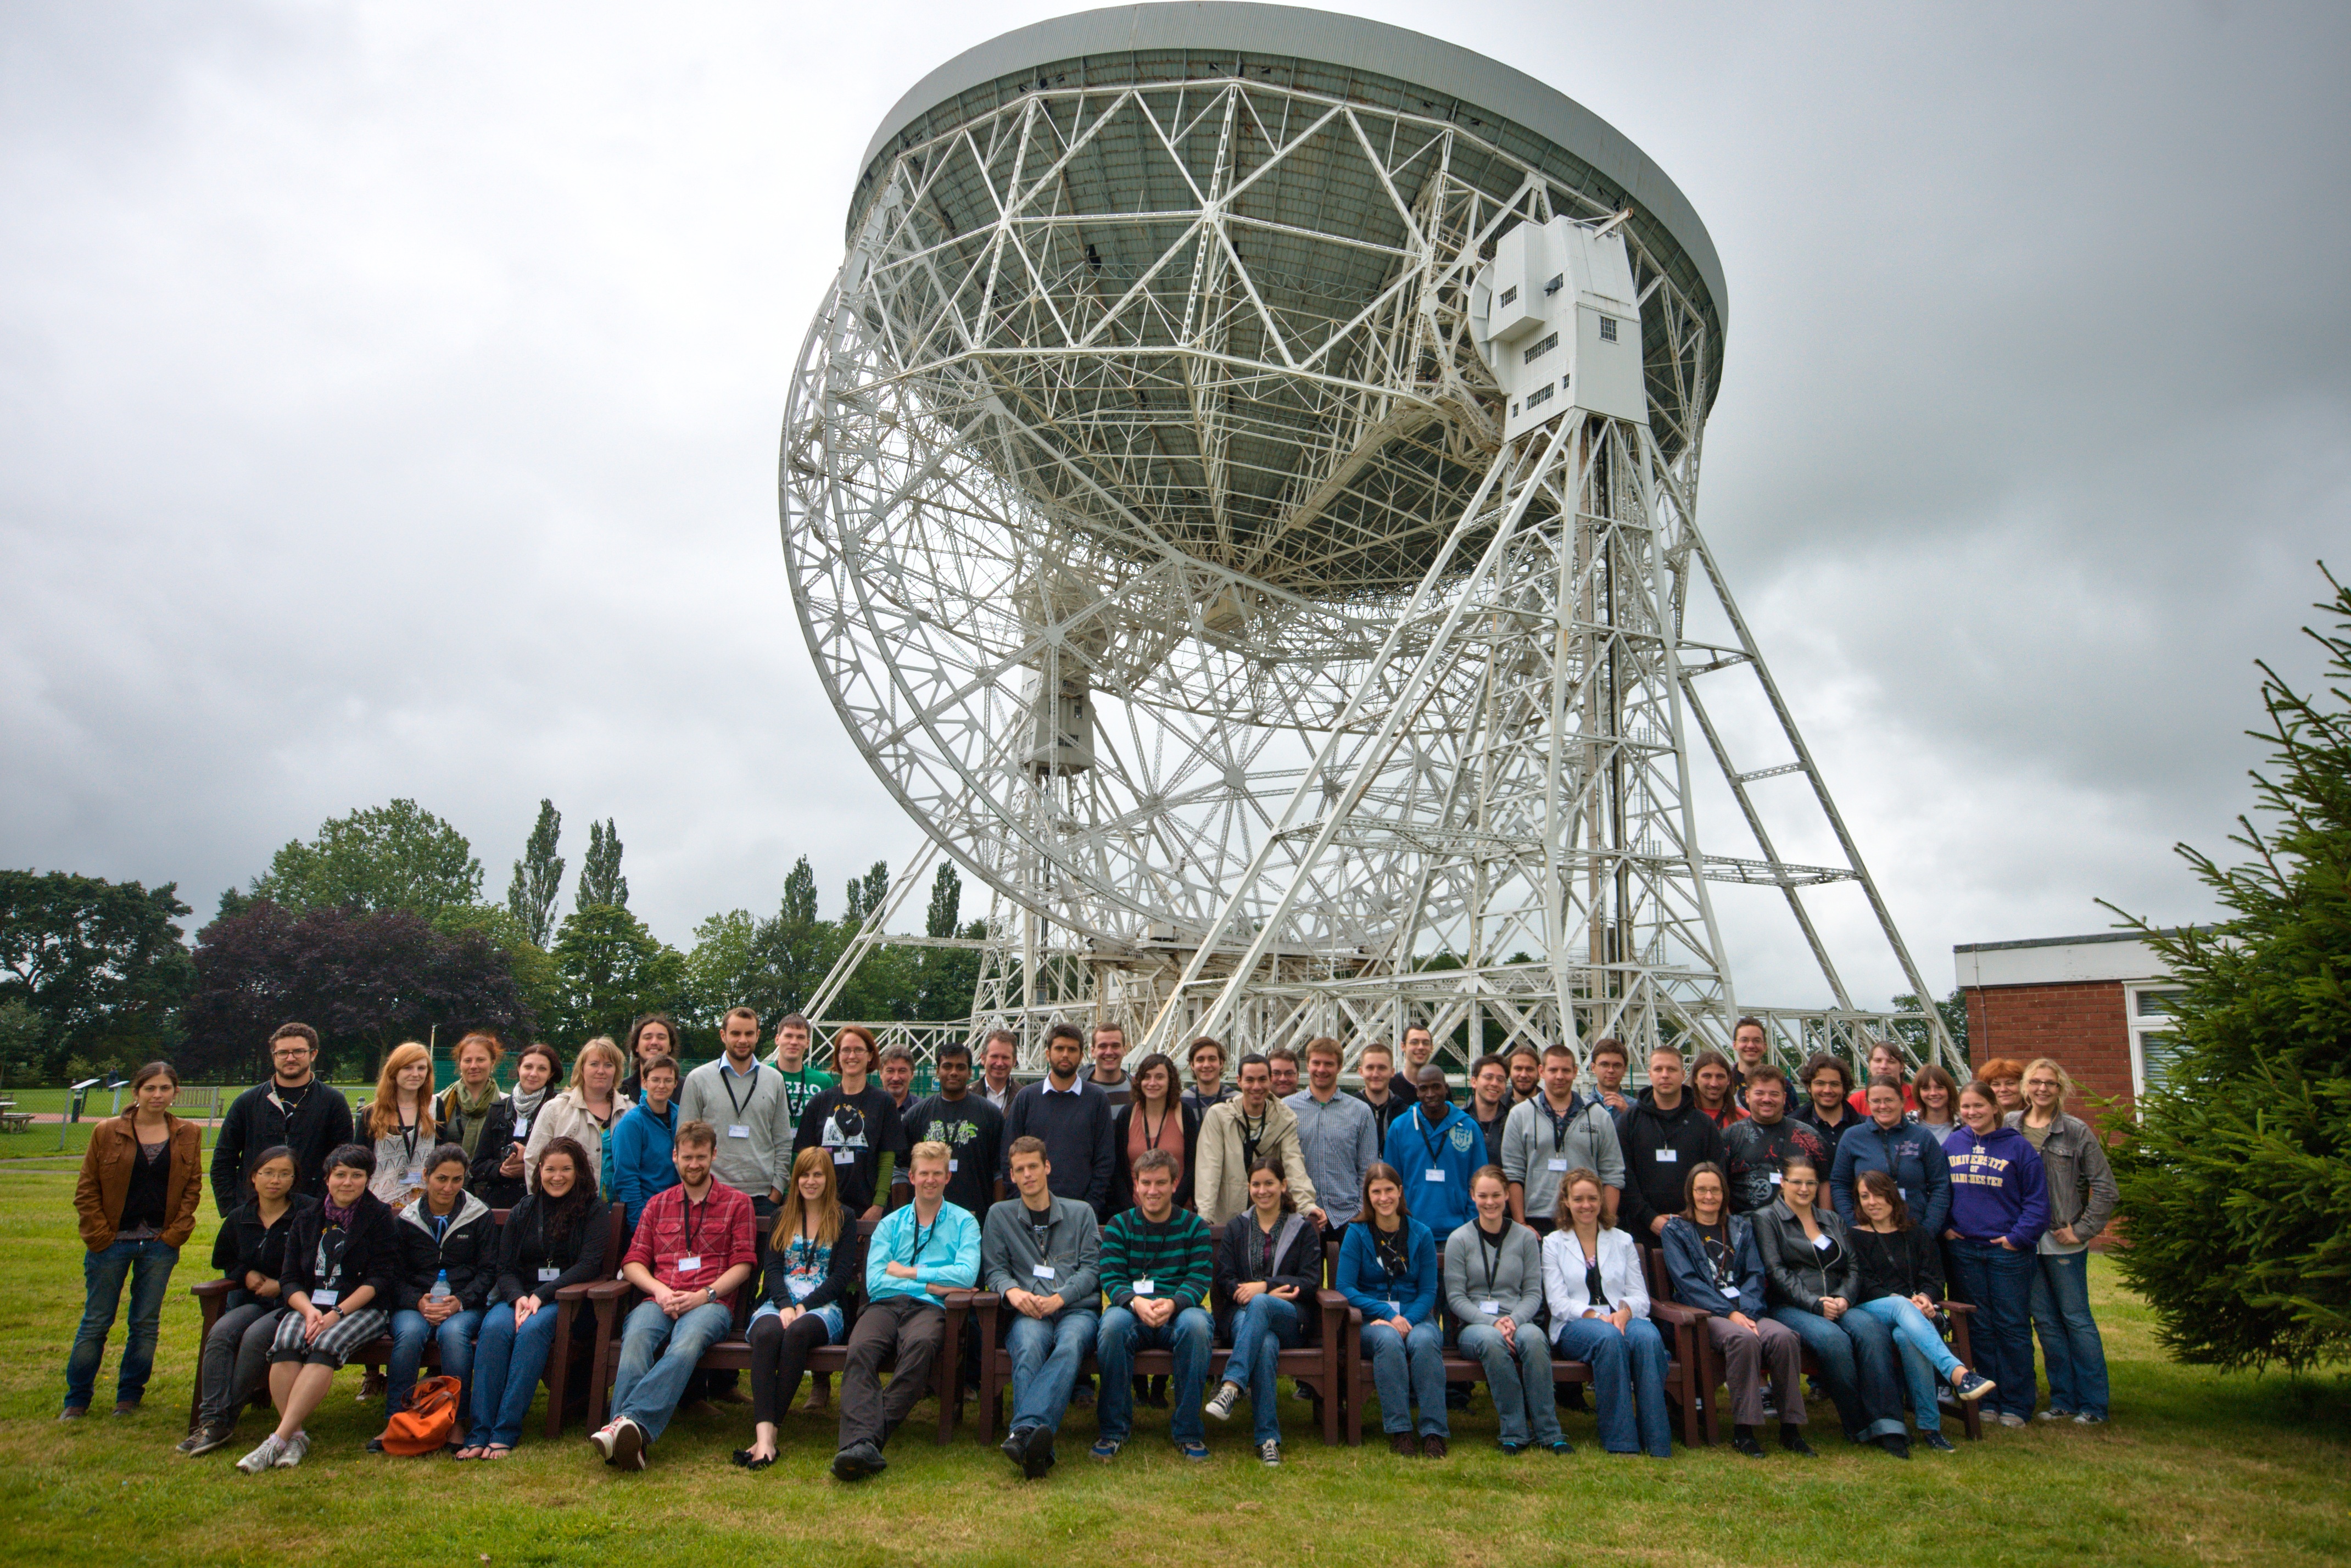 Group picture of the 41st Young European Radio Astronomers Conference